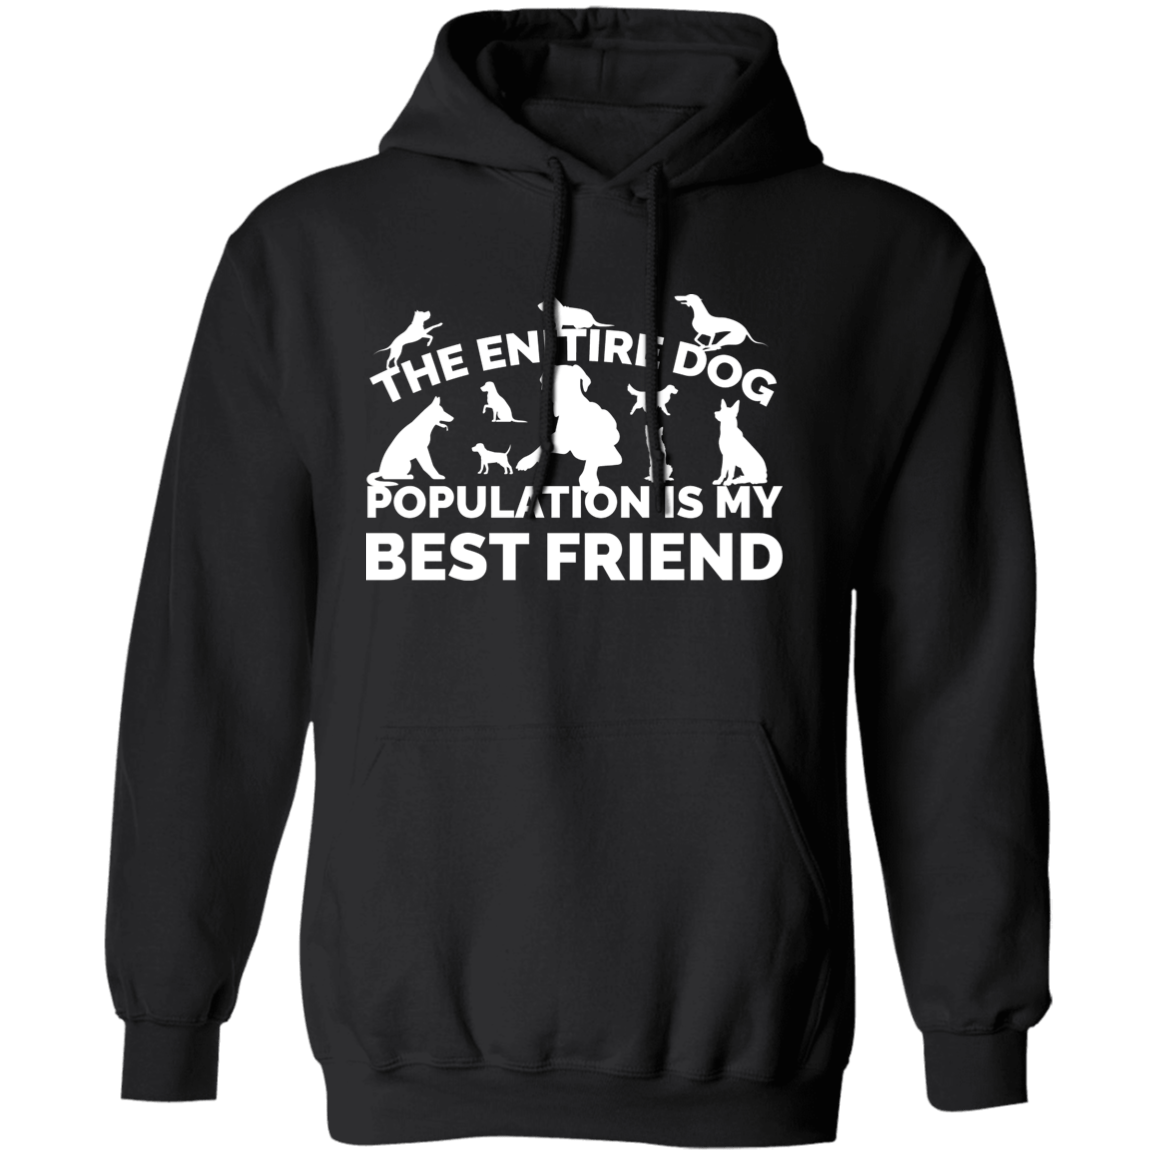 The Entire Dog Population - Hoodie.